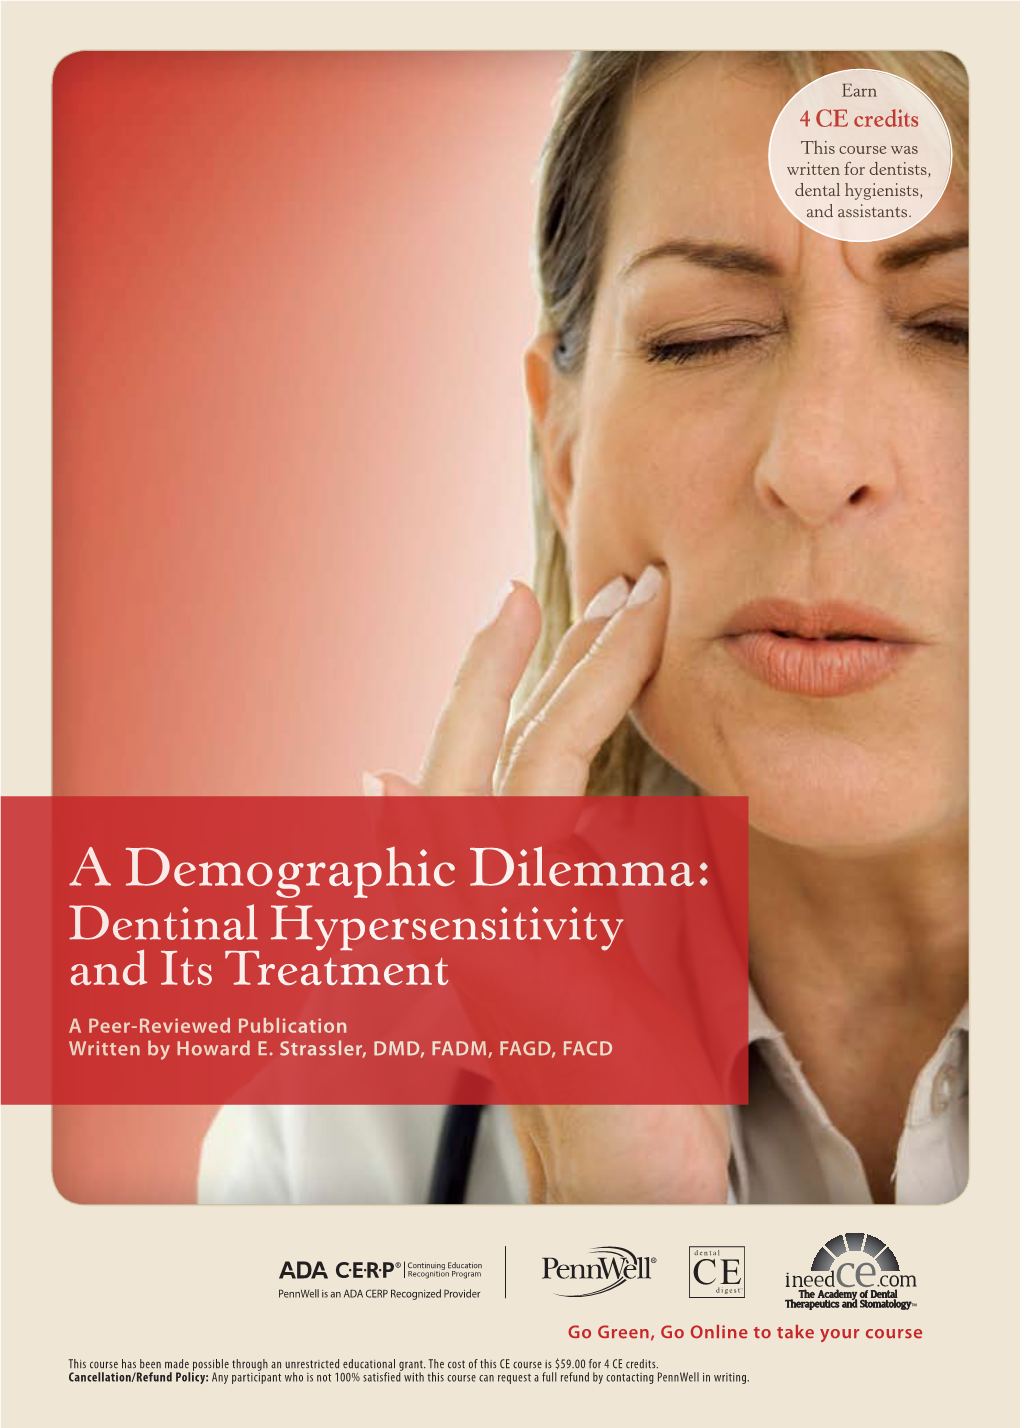 A Demographic Dilemma: Dentinal Hypersensitivity and Its Treatment a Peer-Reviewed Publication Written by Howard E